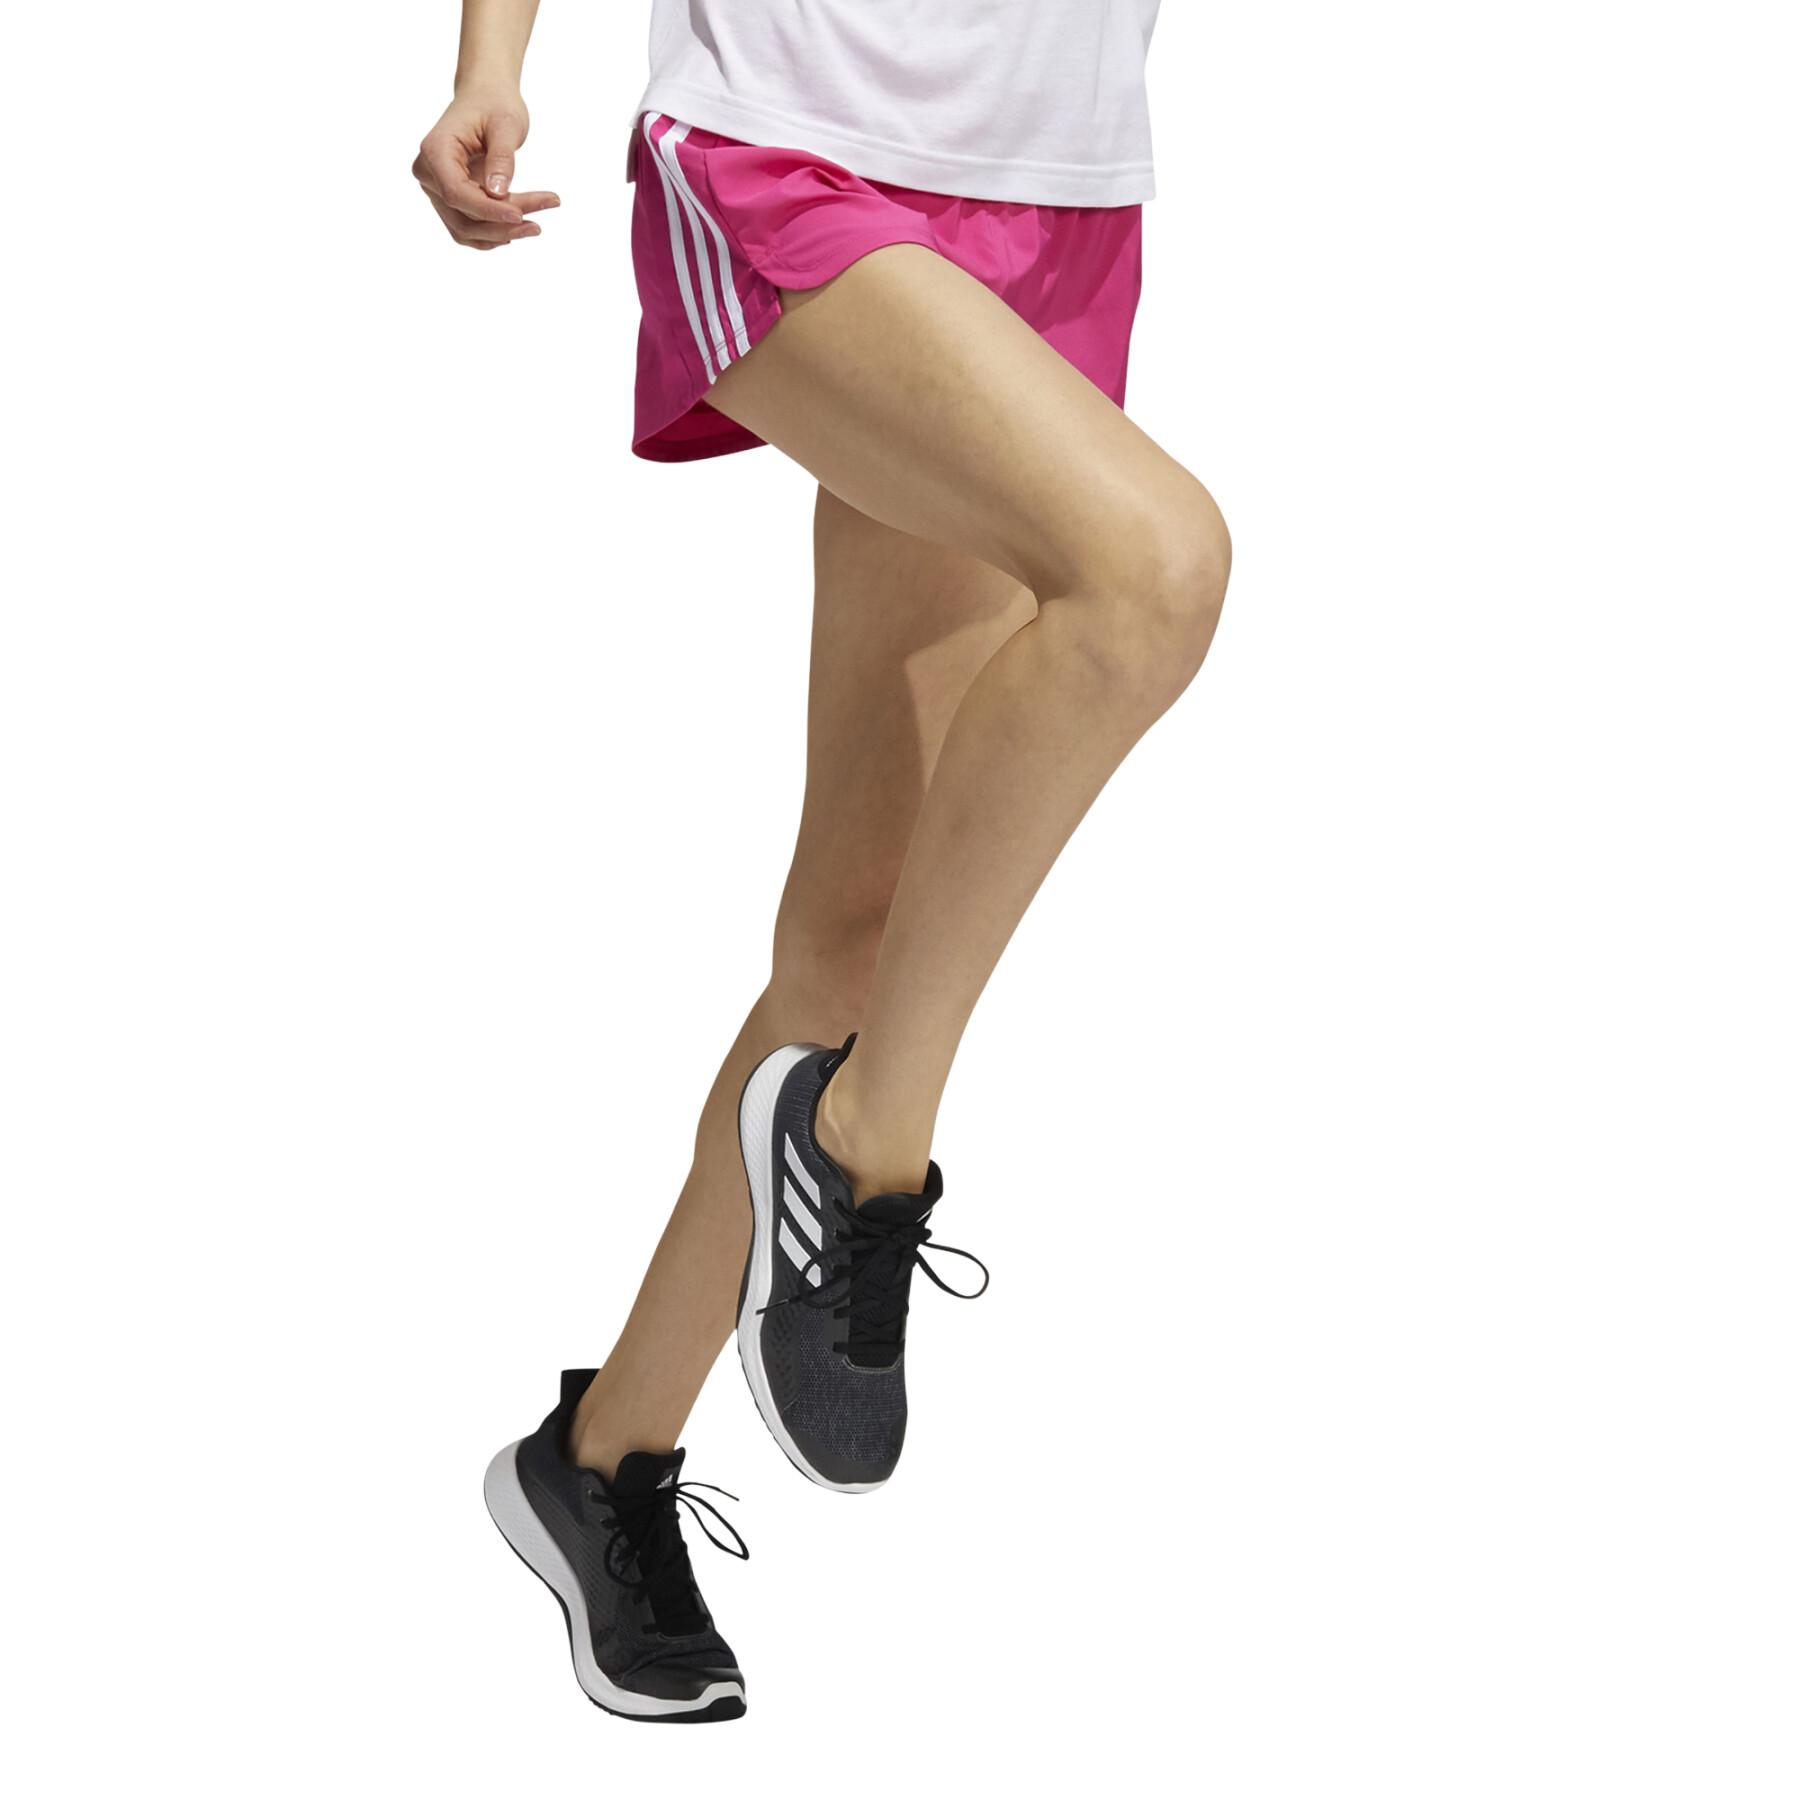 Dames shorts adidas Pacer Woven